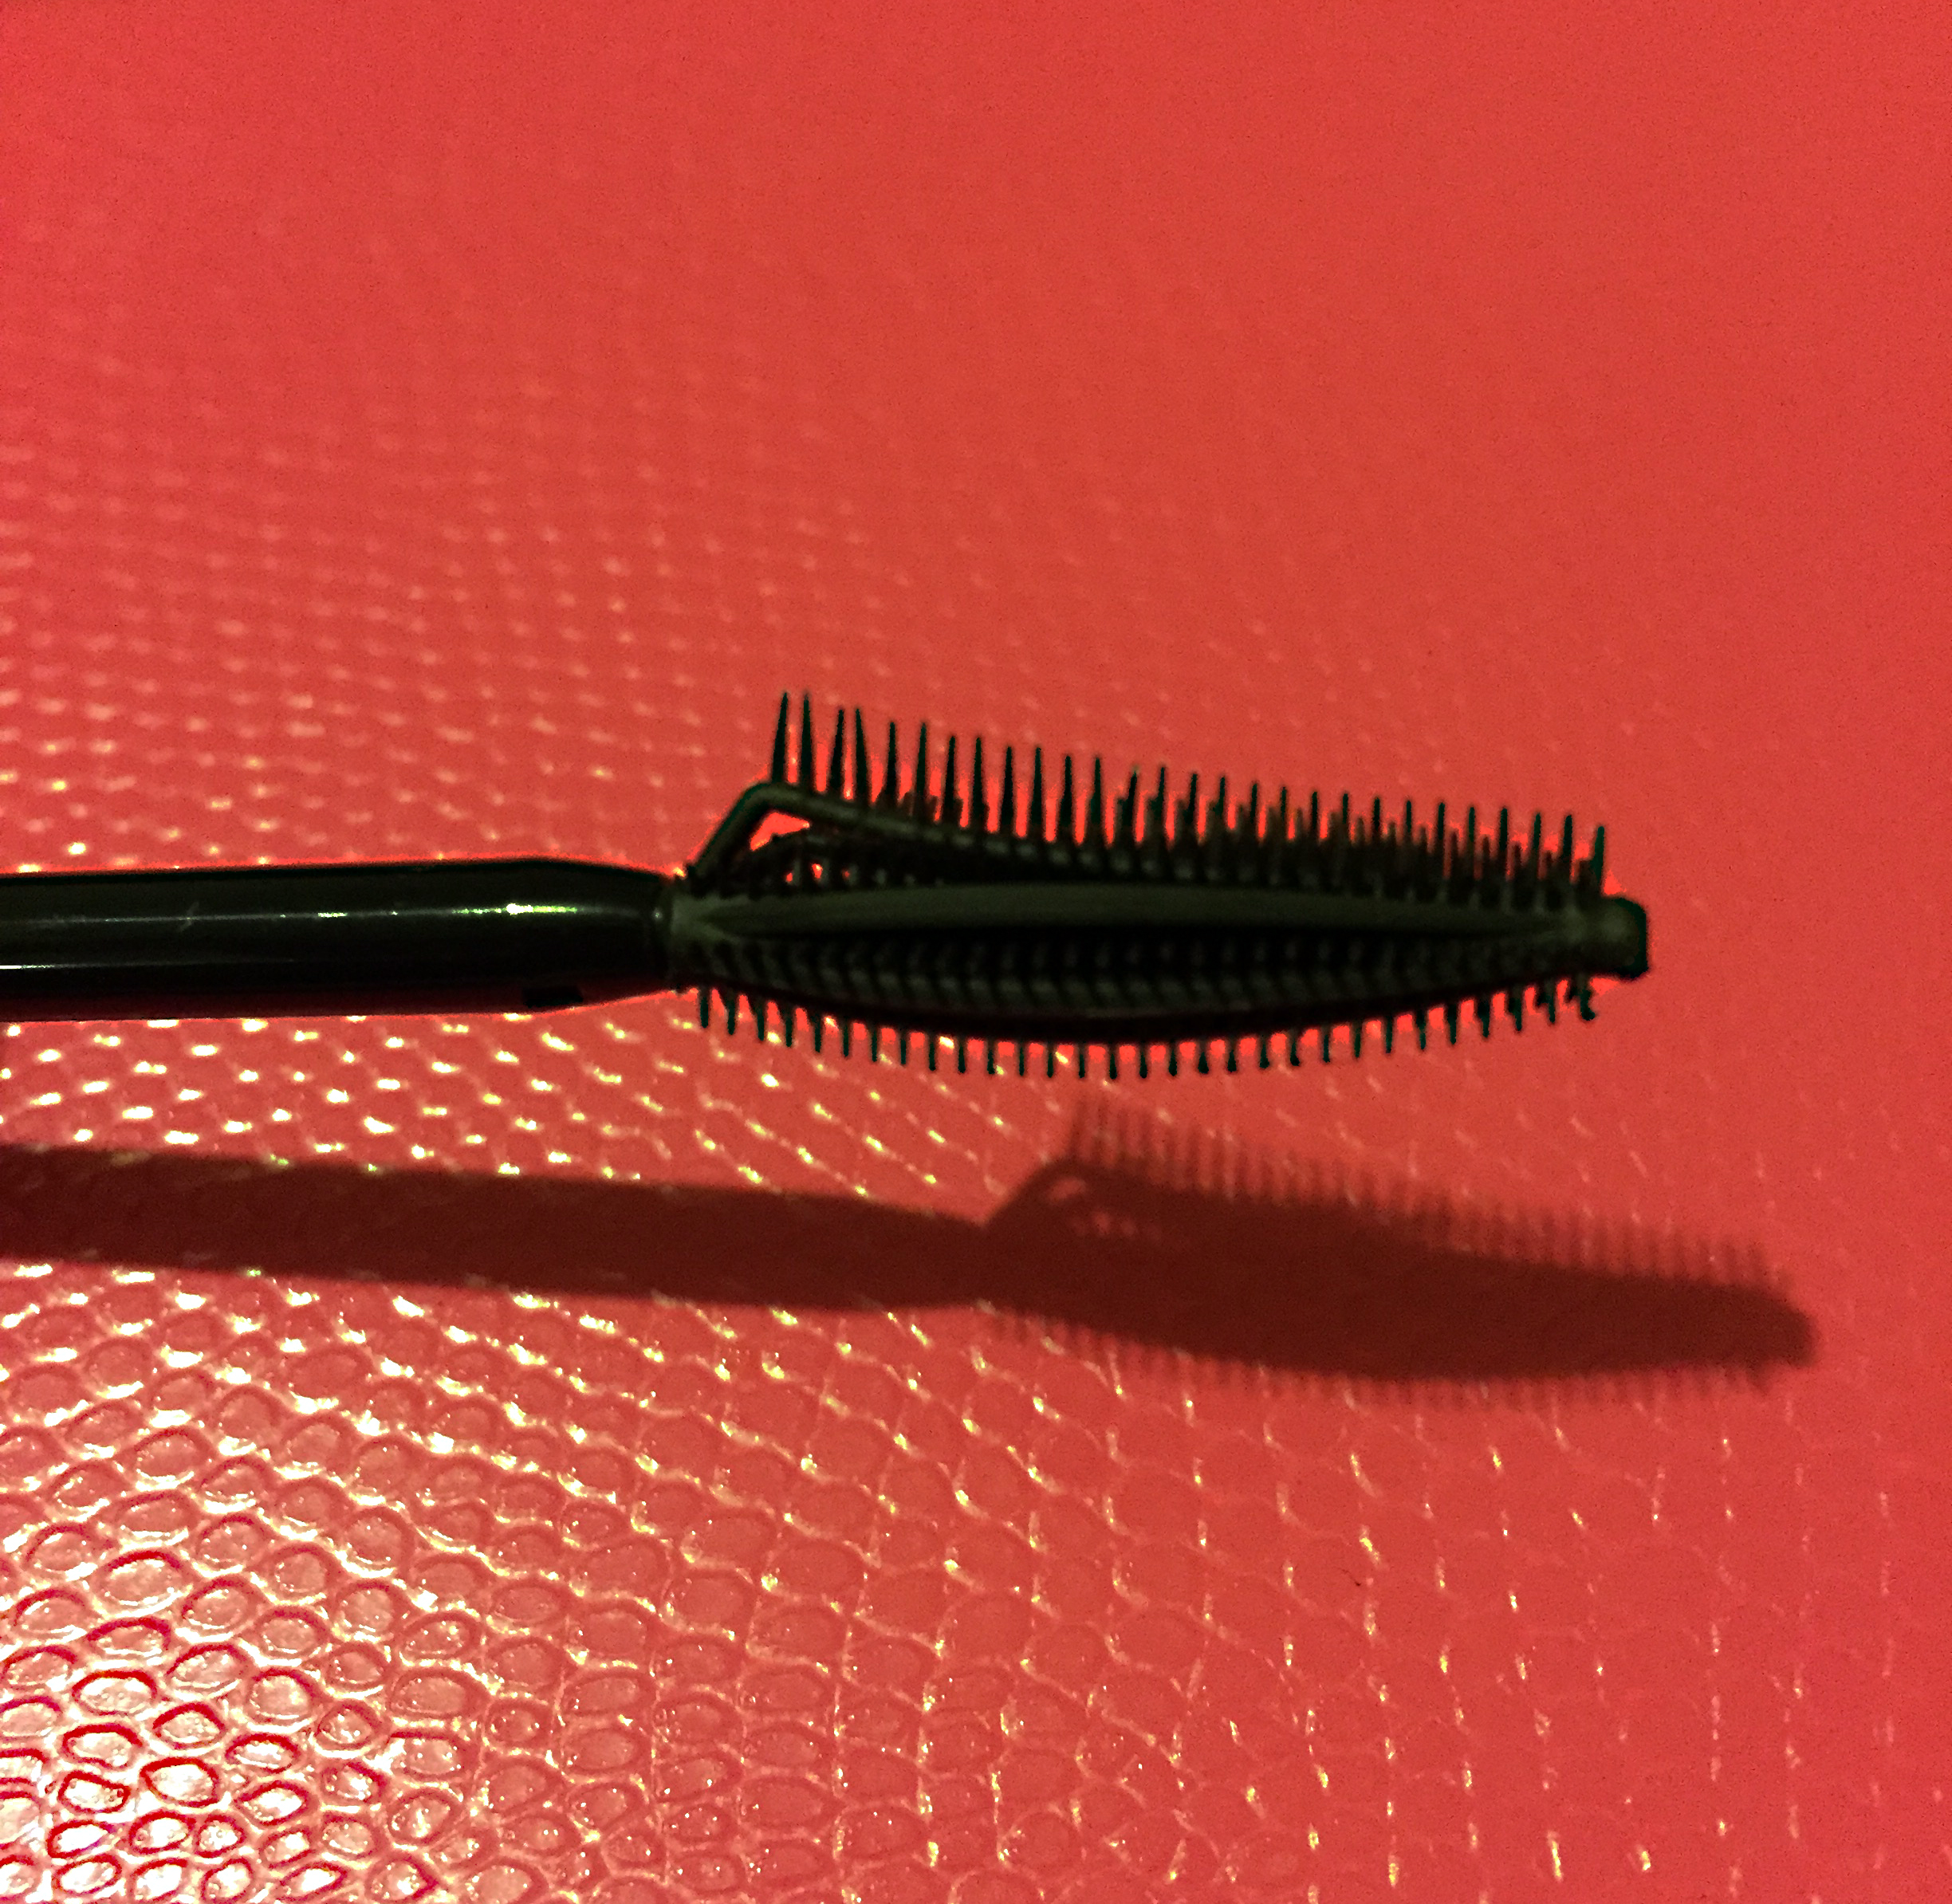 l'oreal butterfly mascara